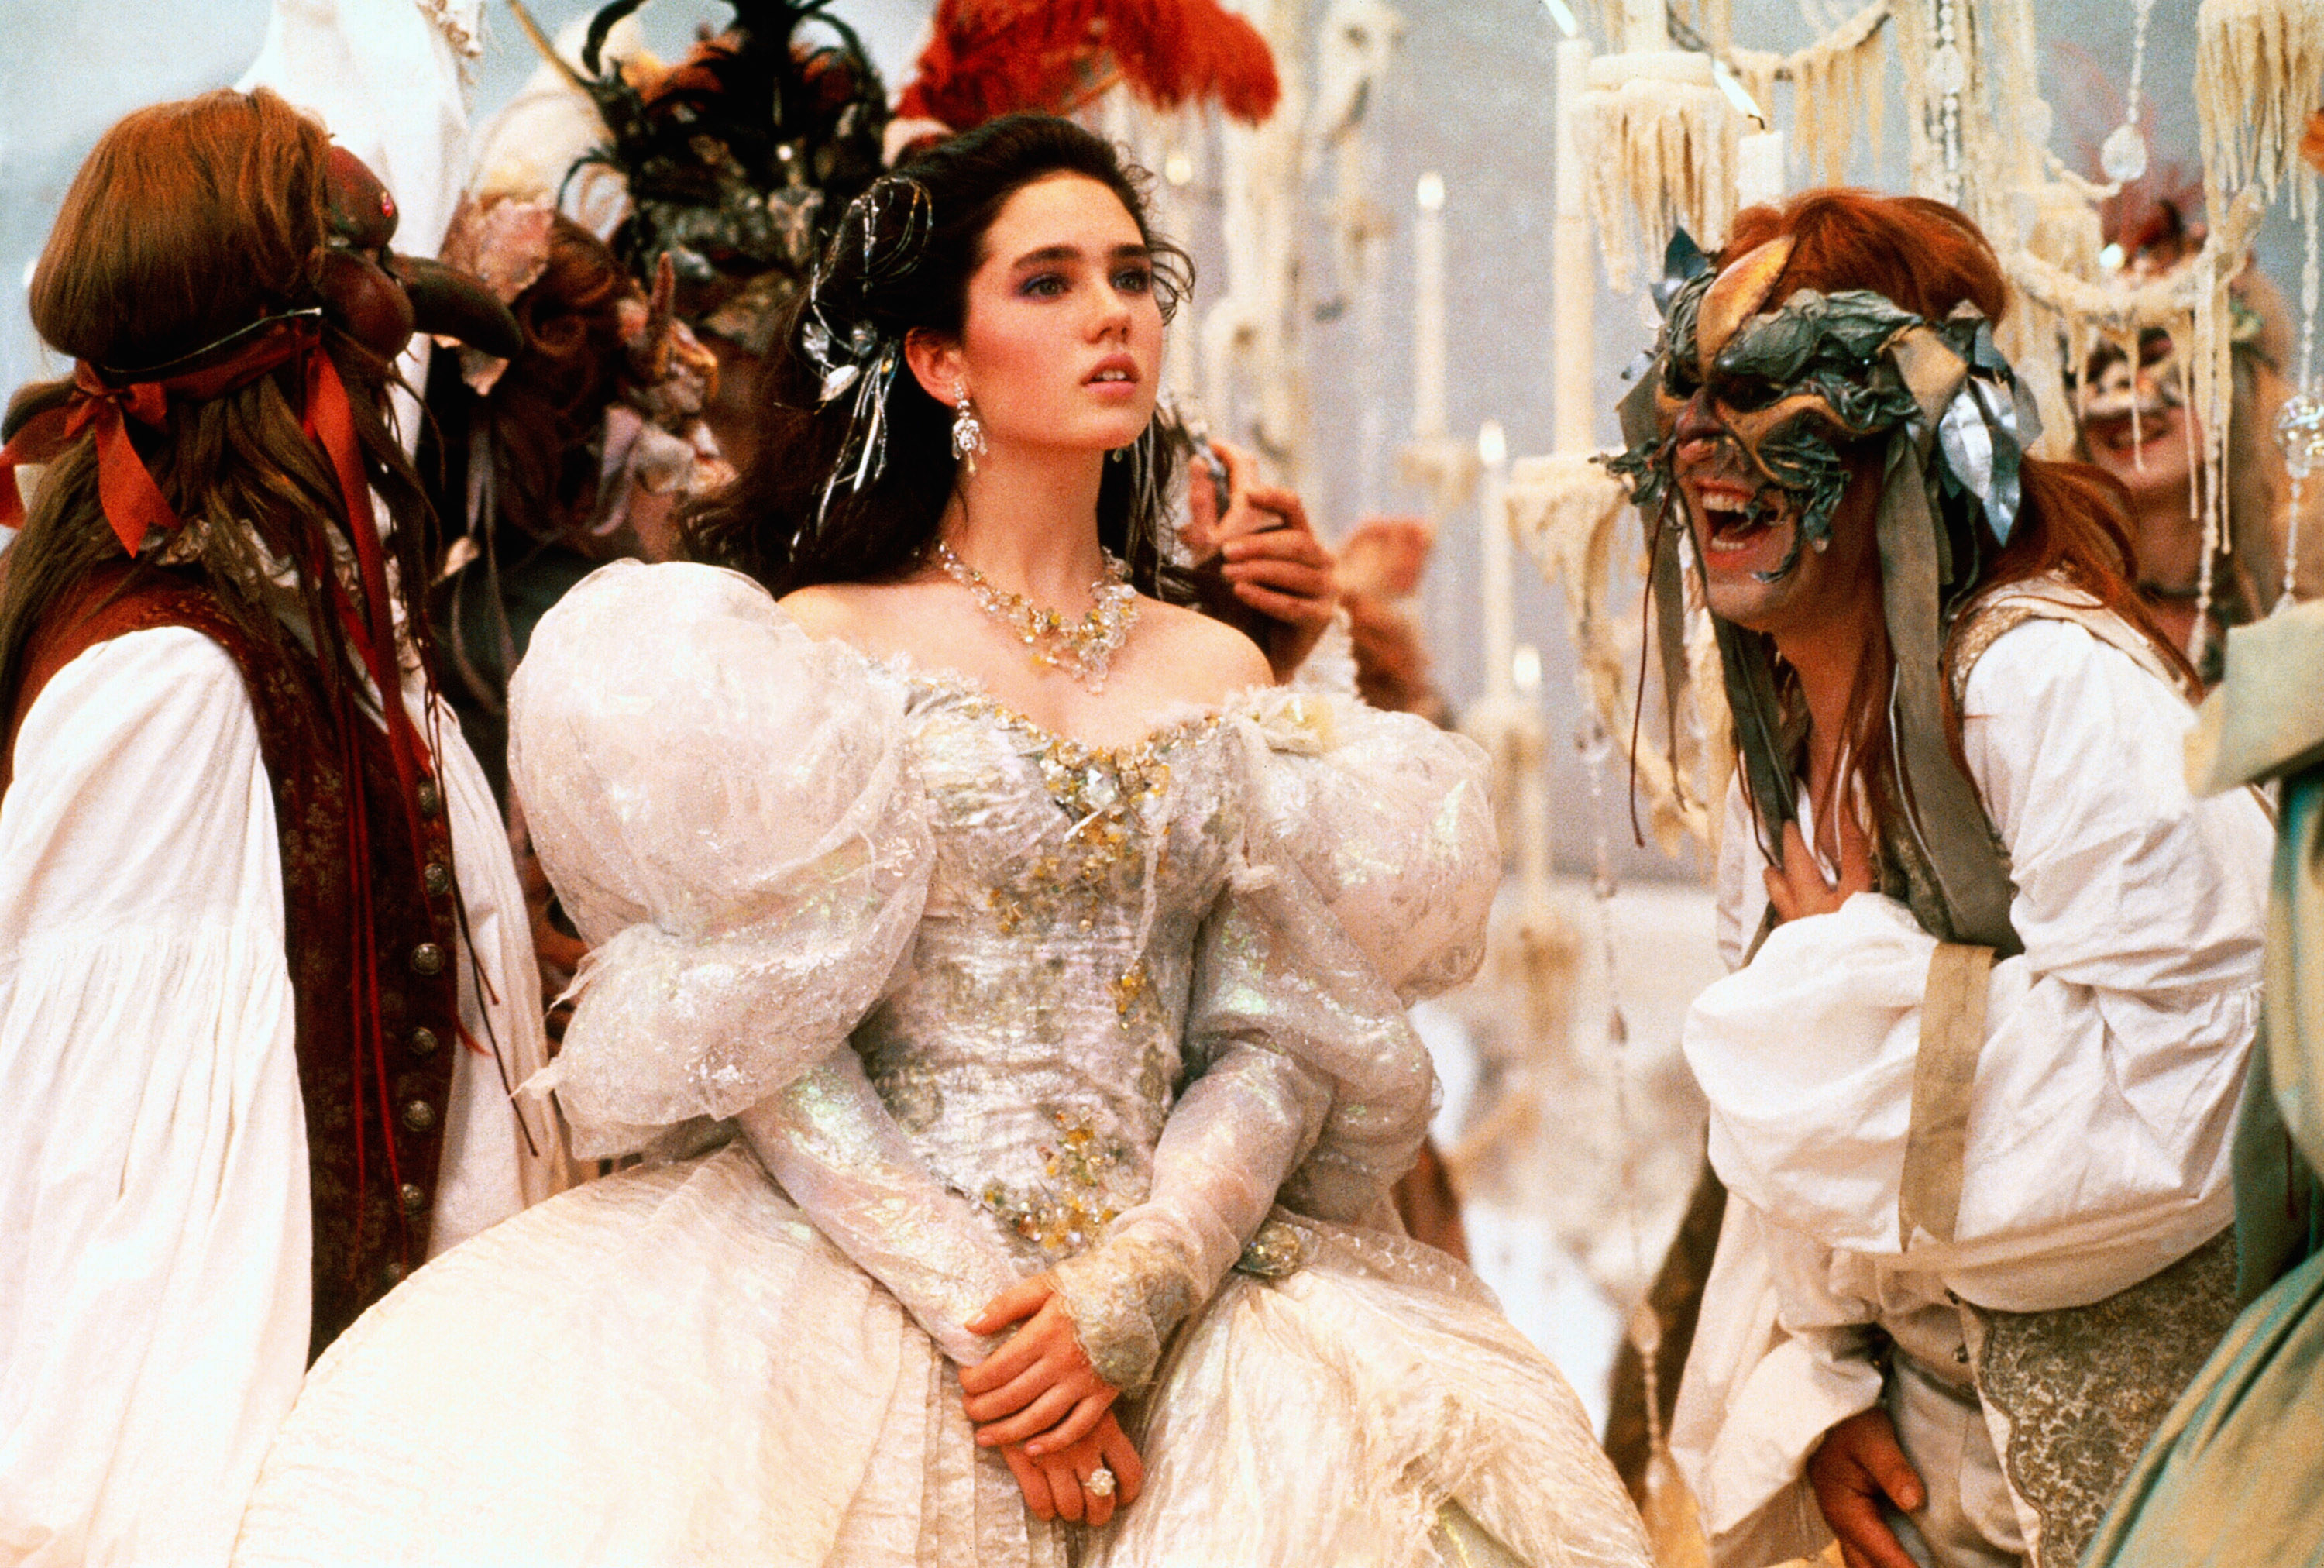 Jennifer Connelly in Labyrinth